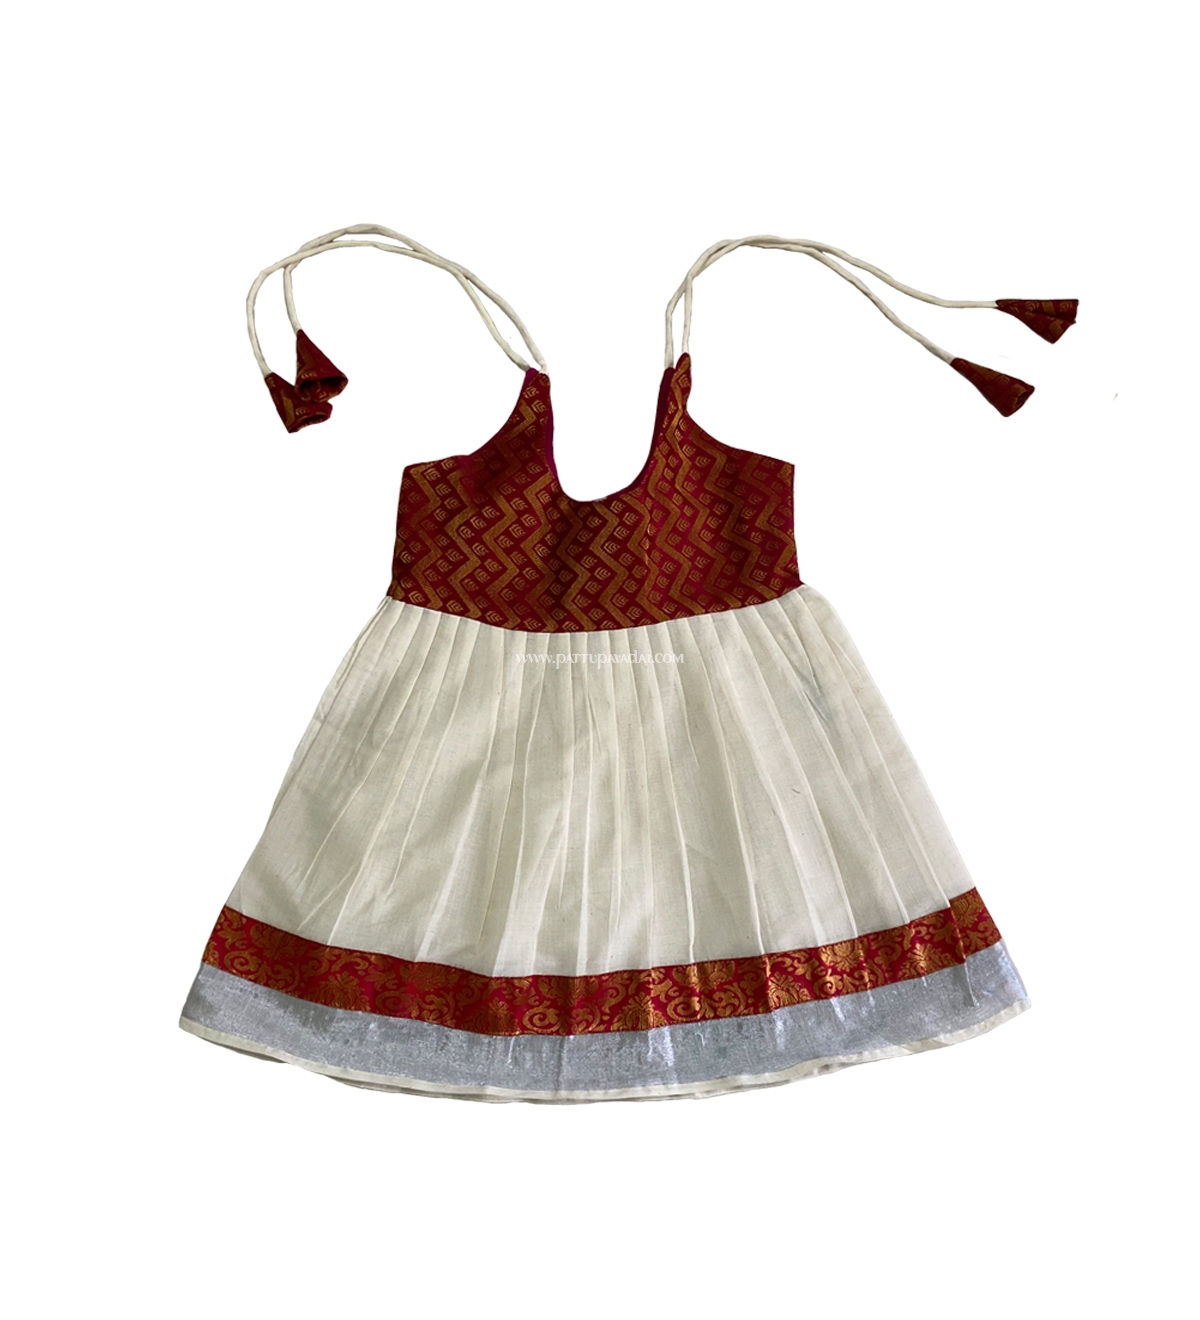 Kerala Knot Frock Maroon and Silver